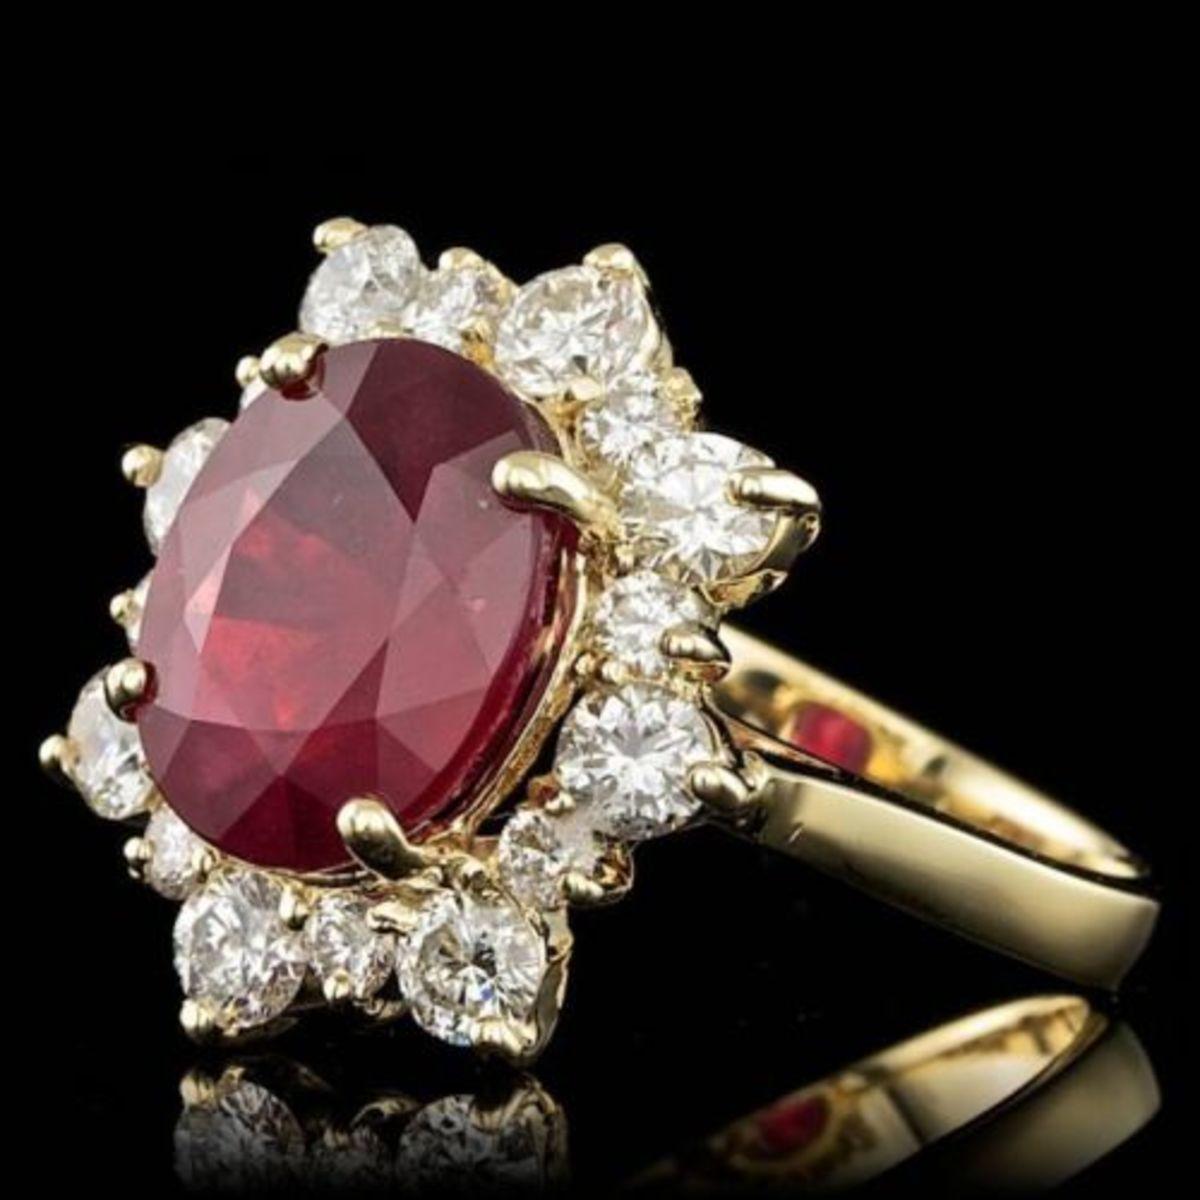 14K Yellow Gold 5.37ct Ruby and 1.36ct Diamond Ring